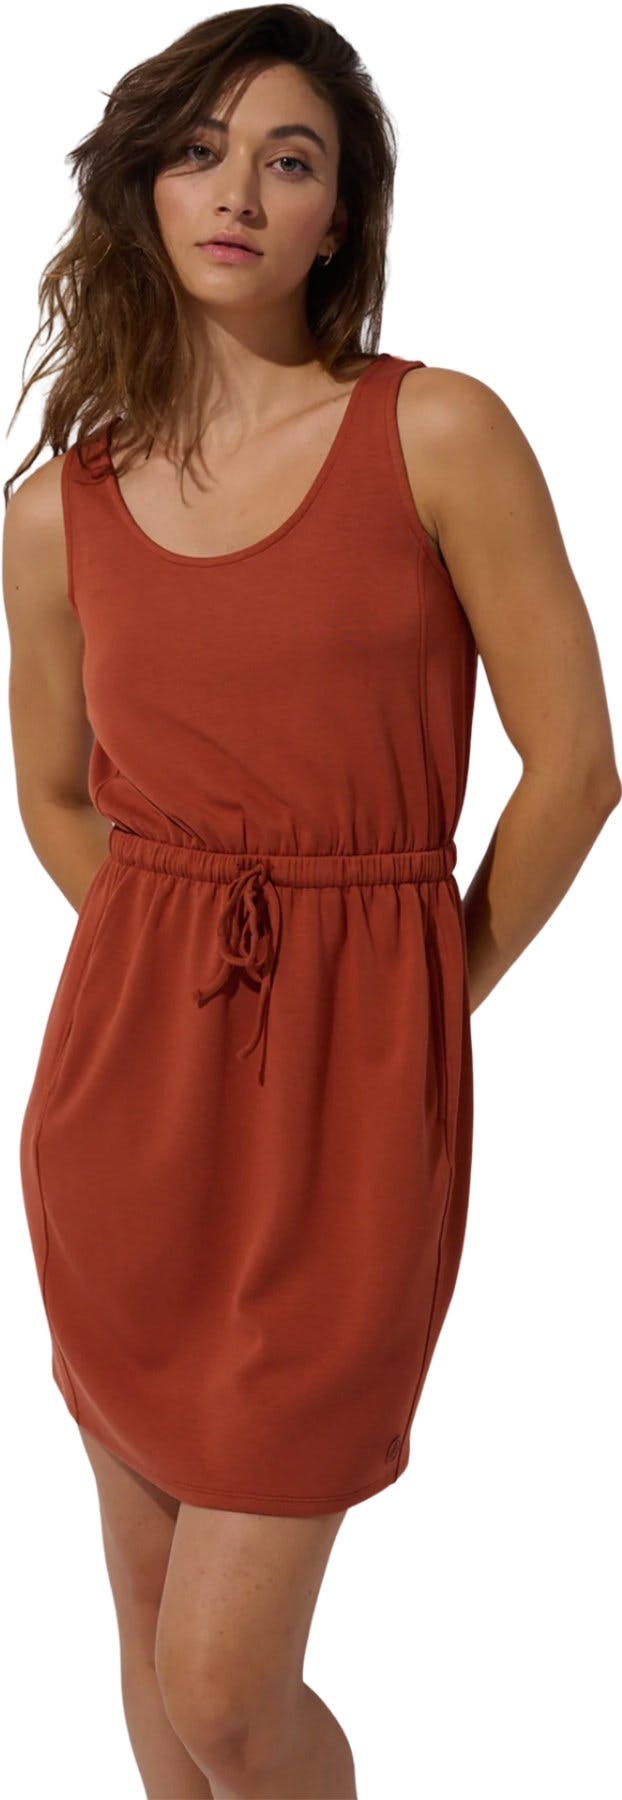 Product image for Sunday Active Dress - Women's